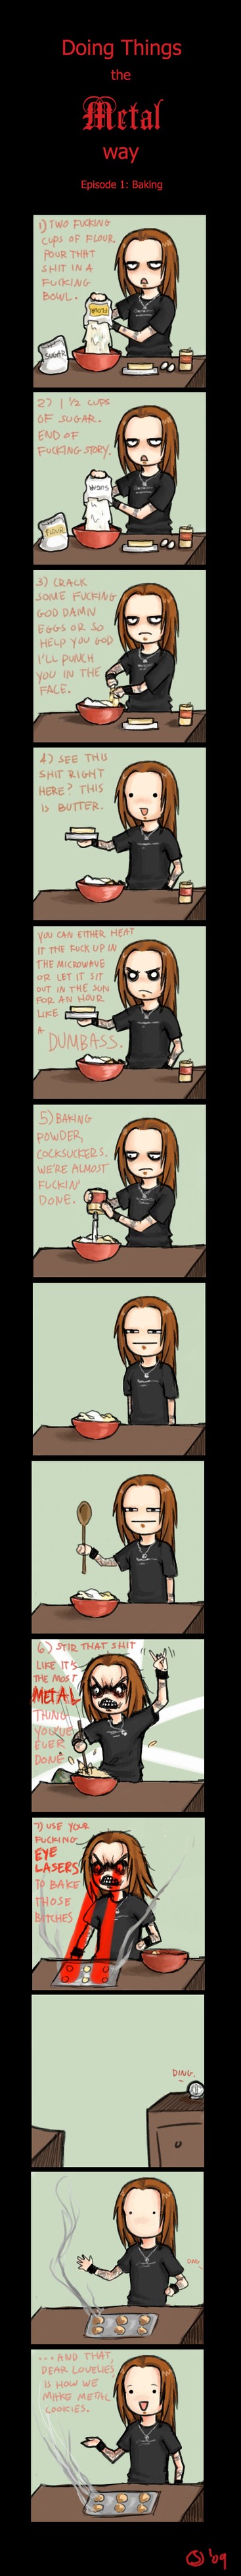 Doing things the Metal way. Episode 1: Baking feat. Alexi from Children of Bodom